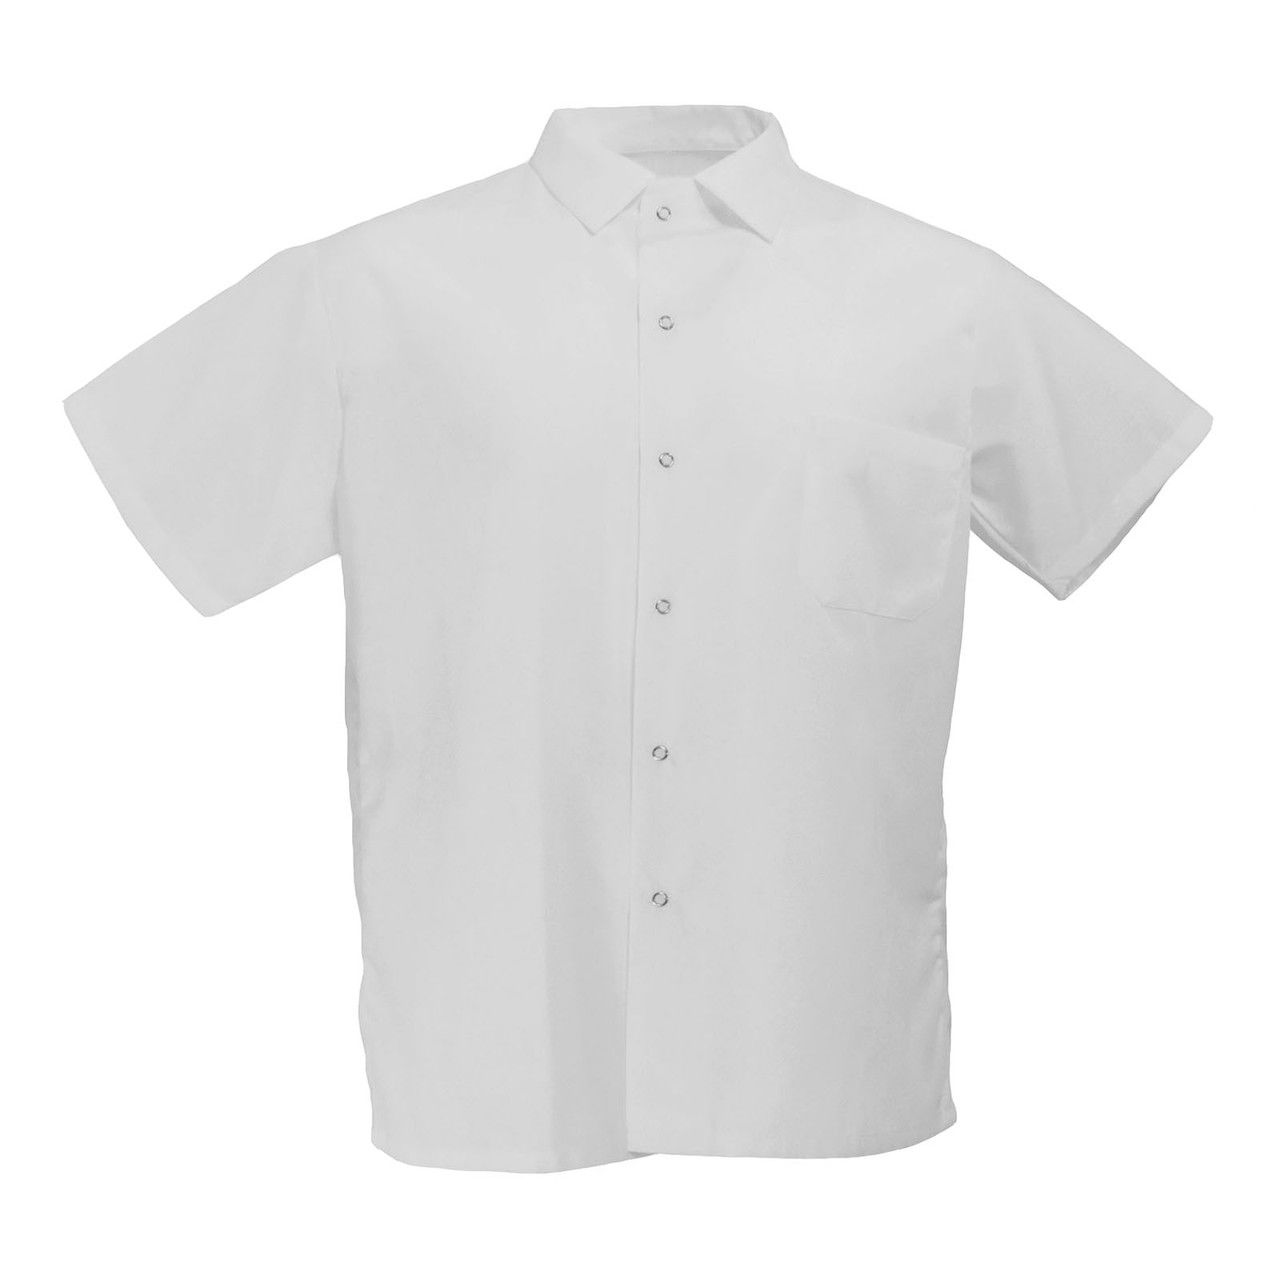 Can chef white shirts like the Chef Trend S102 be used in the kitchen?